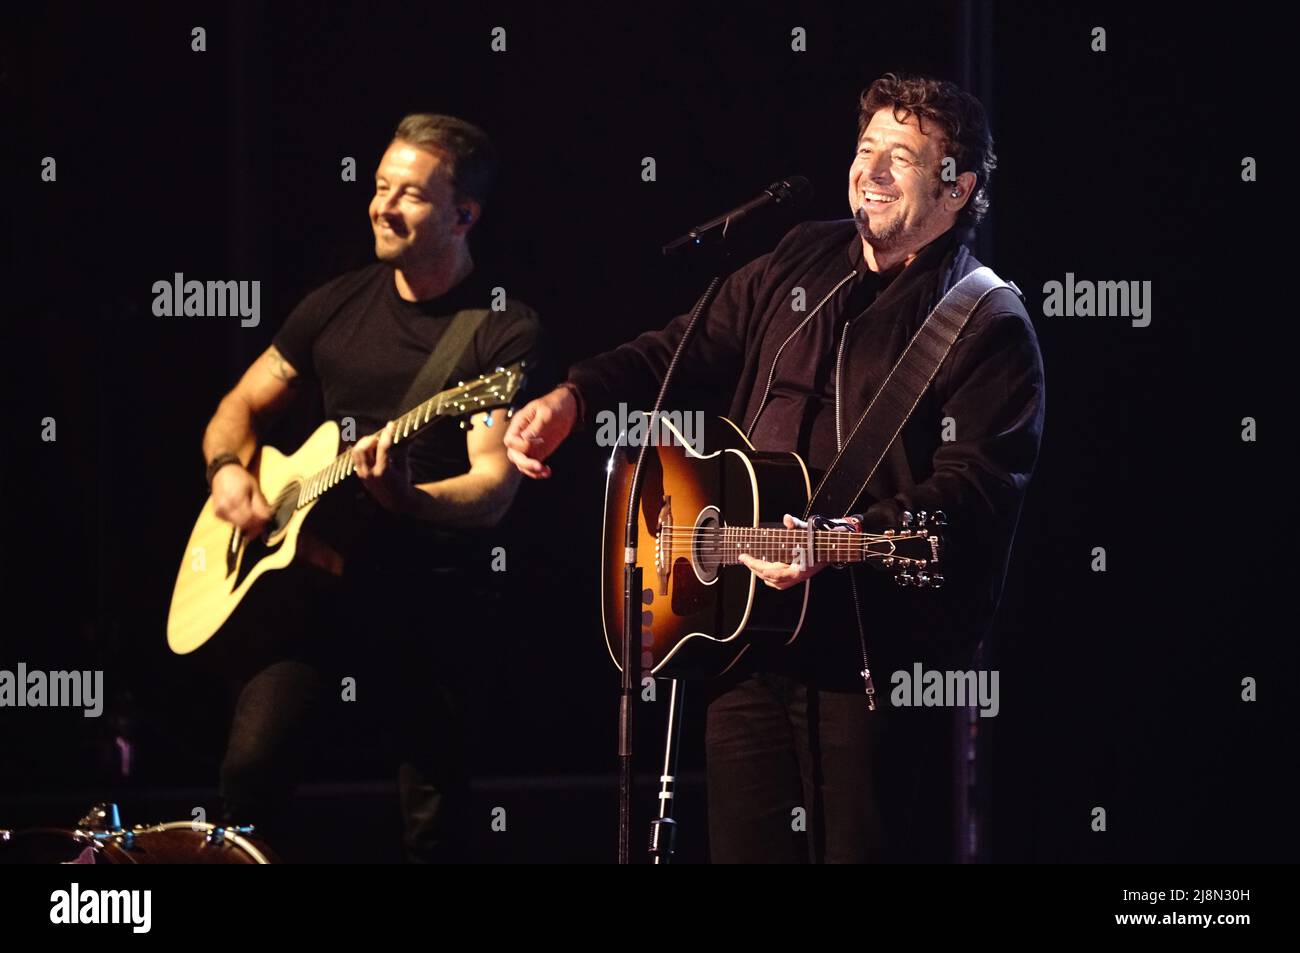 French singer Patrick Bruel in concert in Montreal. Stock Photo